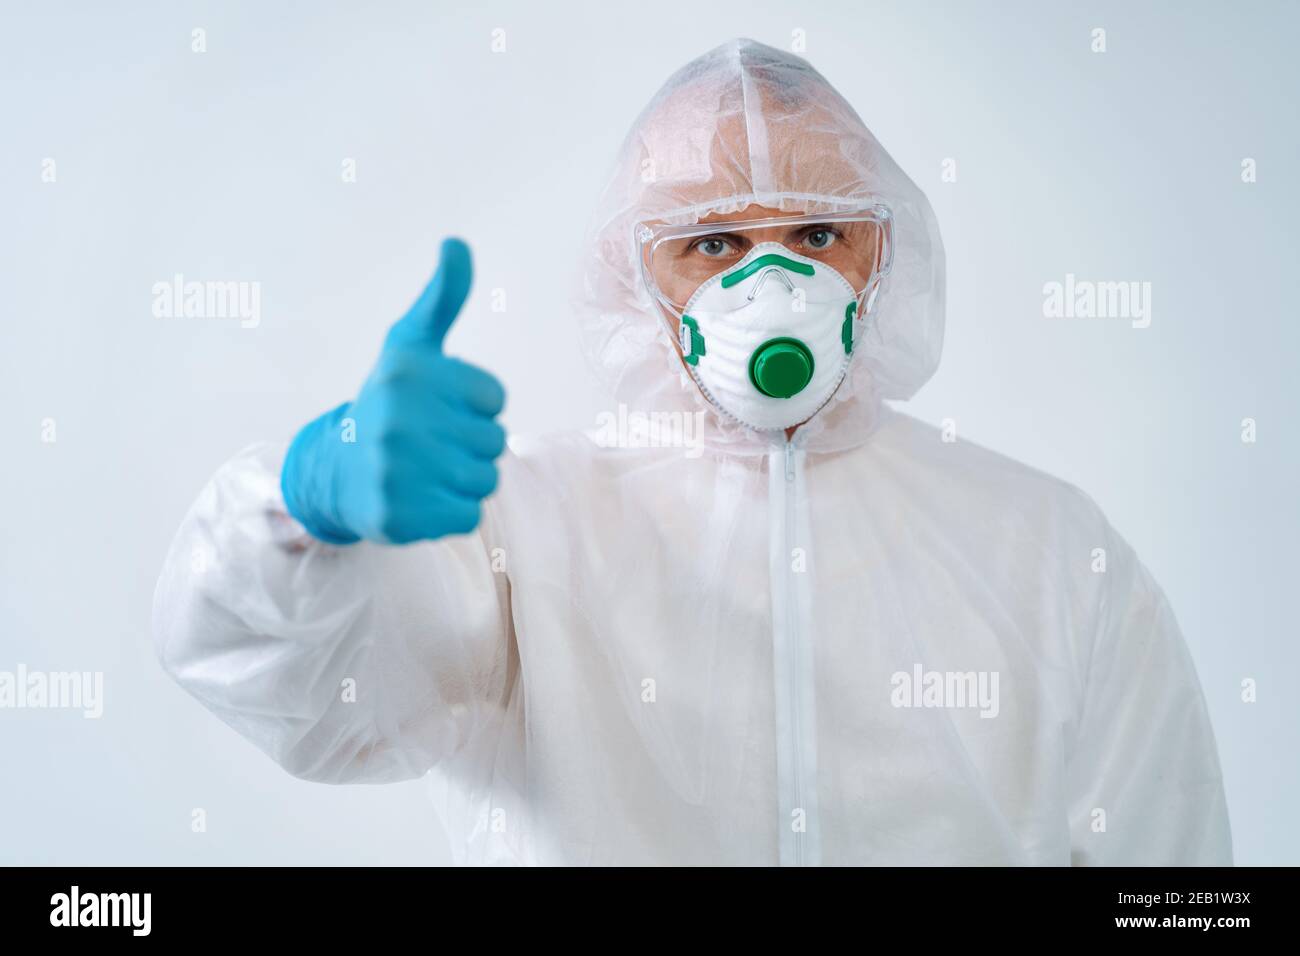 Healthcare worker showing thumbs up gesture, to control an outbreak of virus Stock Photo